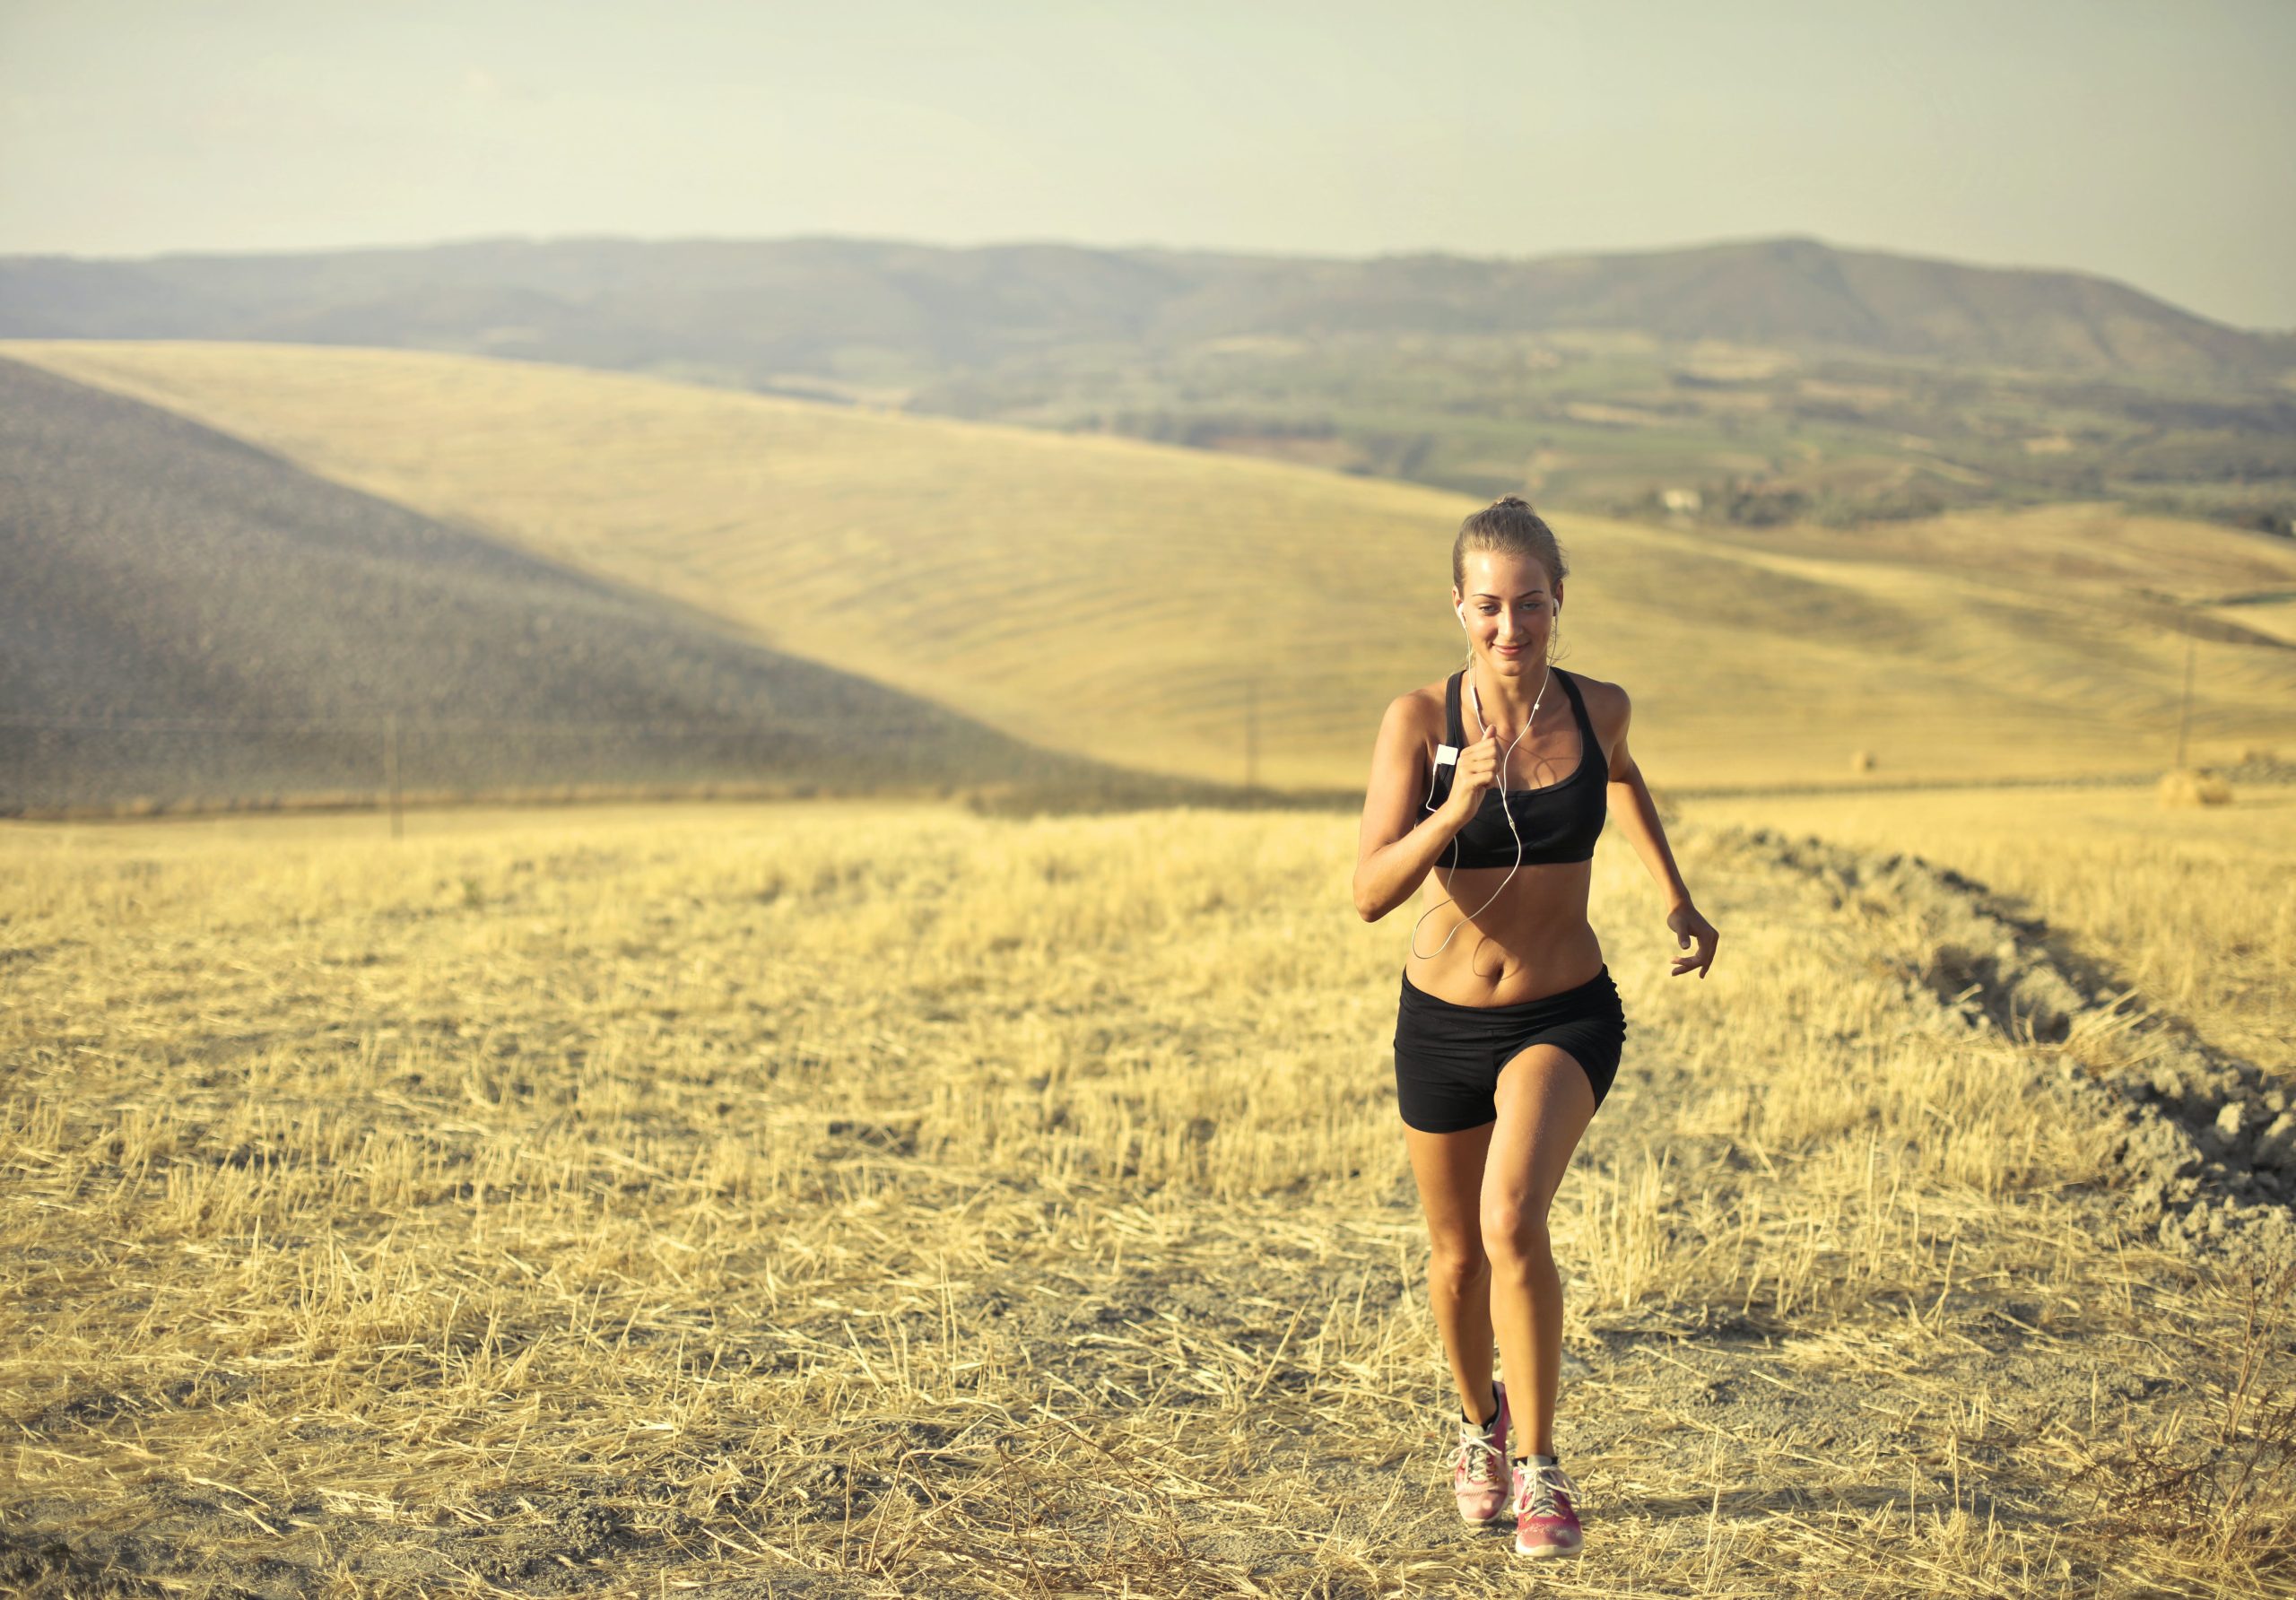 A woman jogging in a field in tuscany.